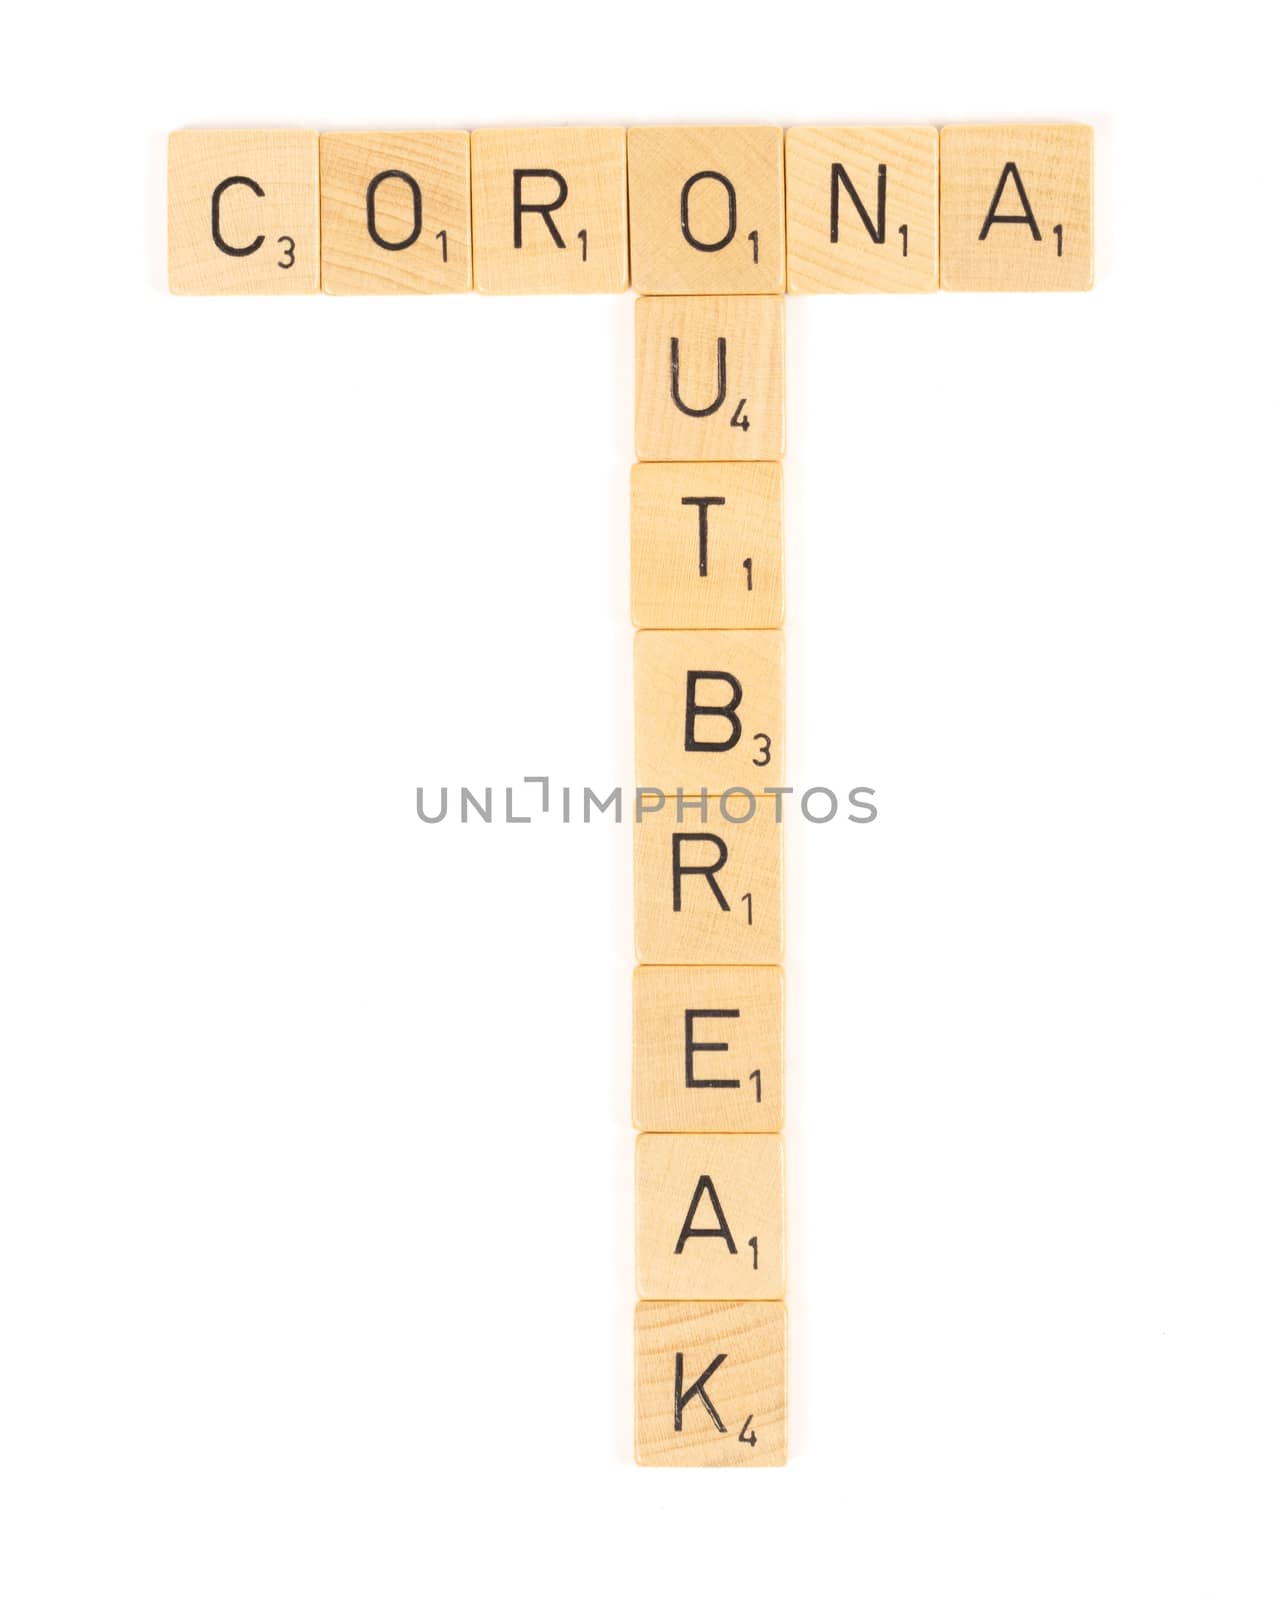 Corona outbreak scrable letters, isolated on a white background